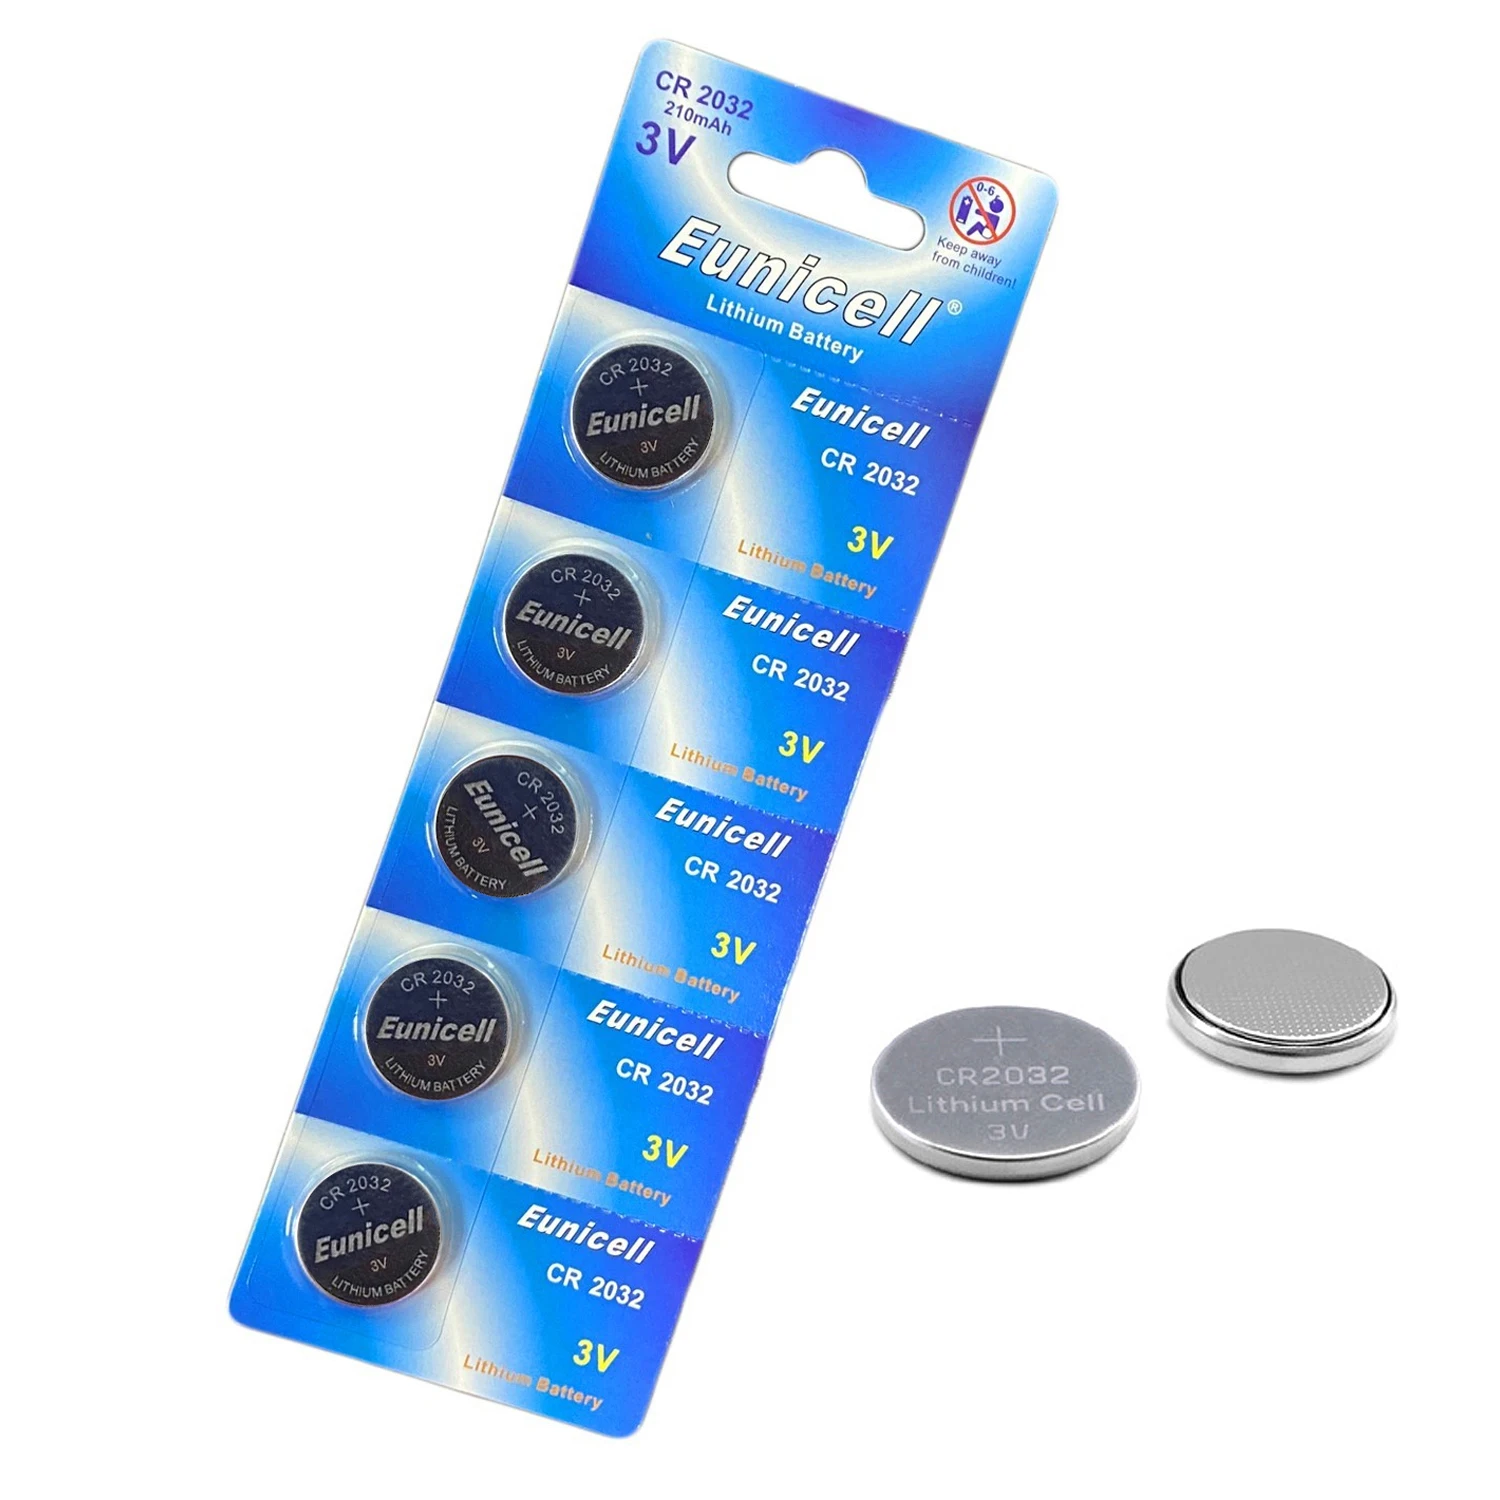 1 x Eunicell 3V Lithium Button Coin Cell Battery CR2016 CR2032 CR2025 Batteries 